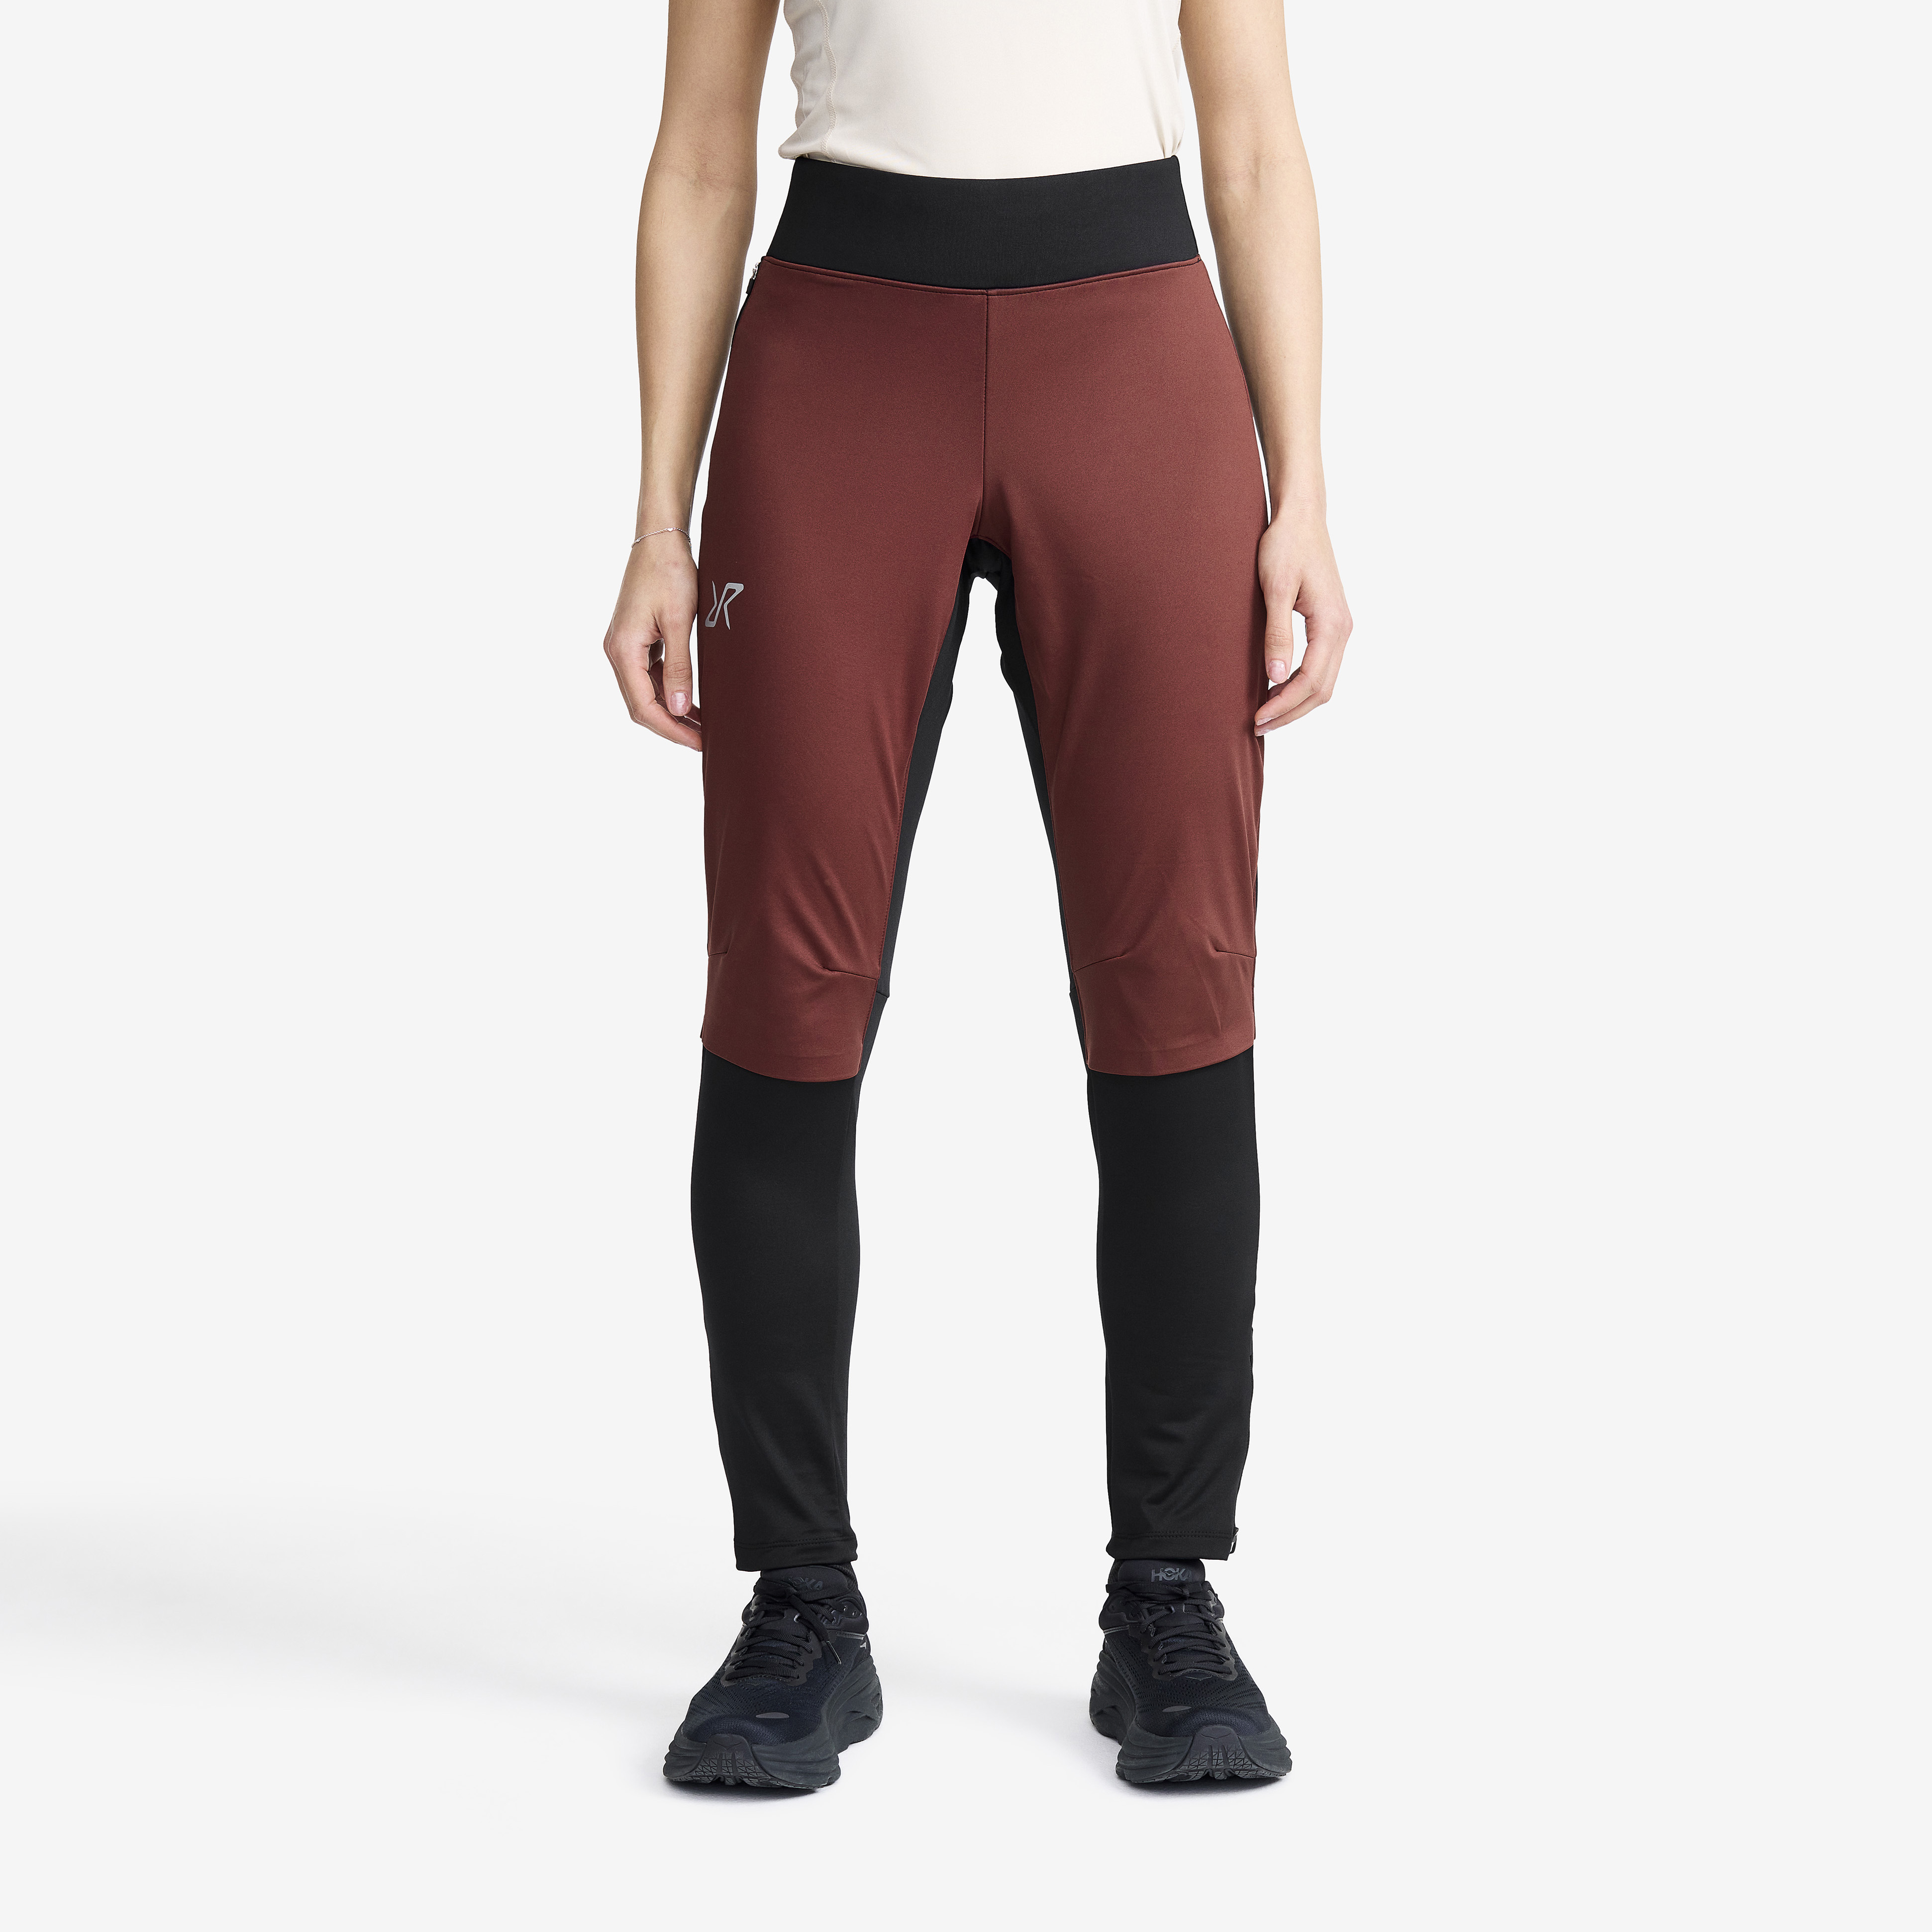 Pace Wind Tights – Dam – Andorra Storlek:L – Outdoor Tights